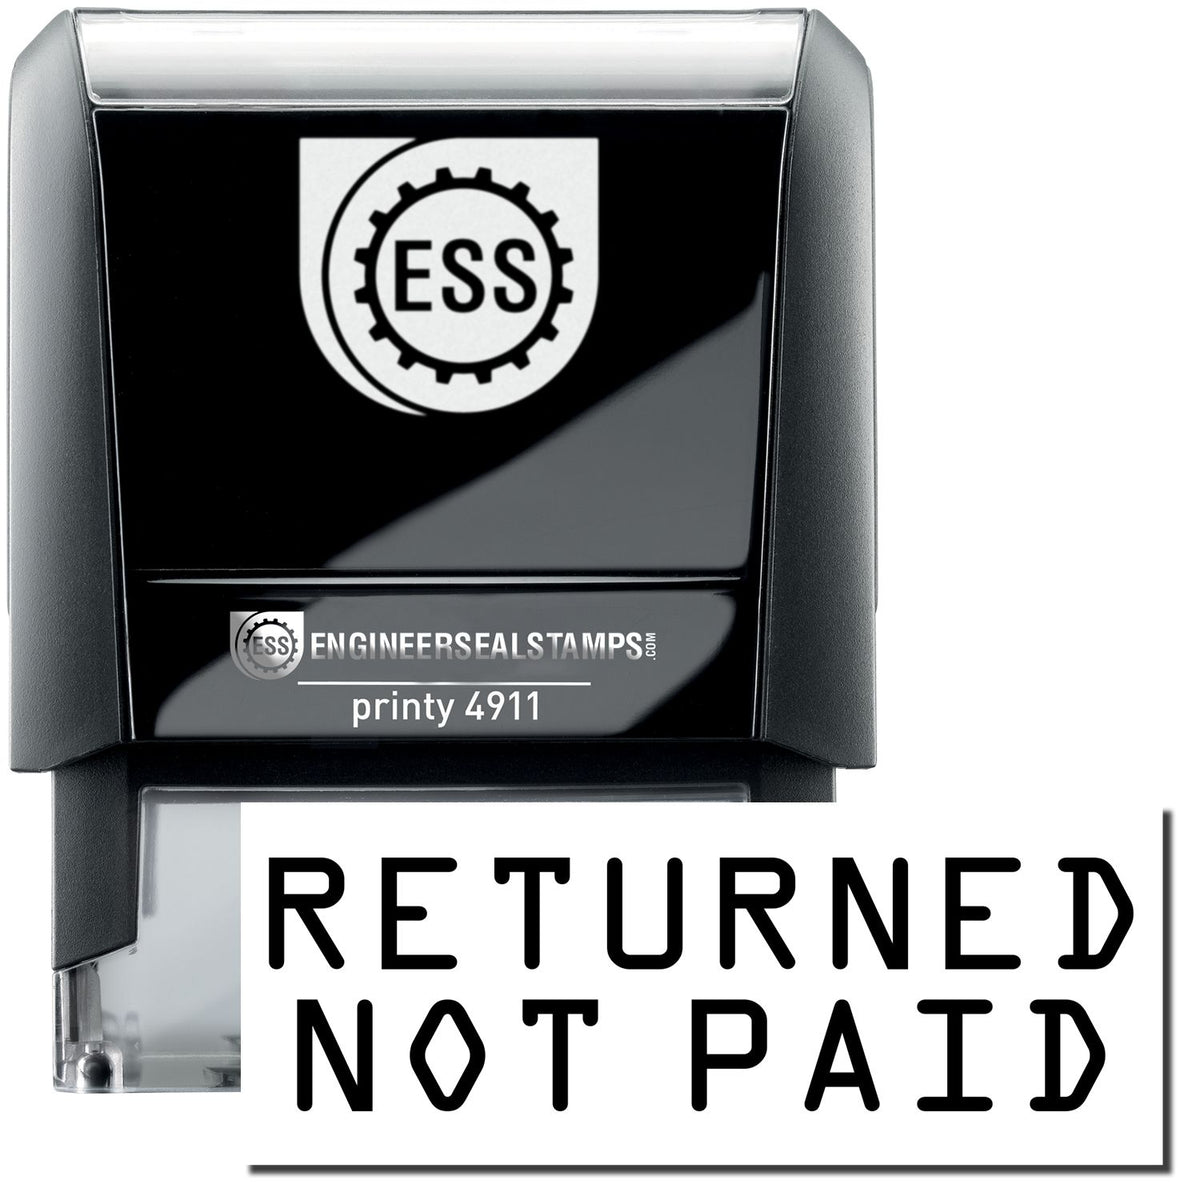 A self-inking stamp with a stamped image showing how the text &quot;RETURNED NOT PAID&quot; is displayed after stamping.